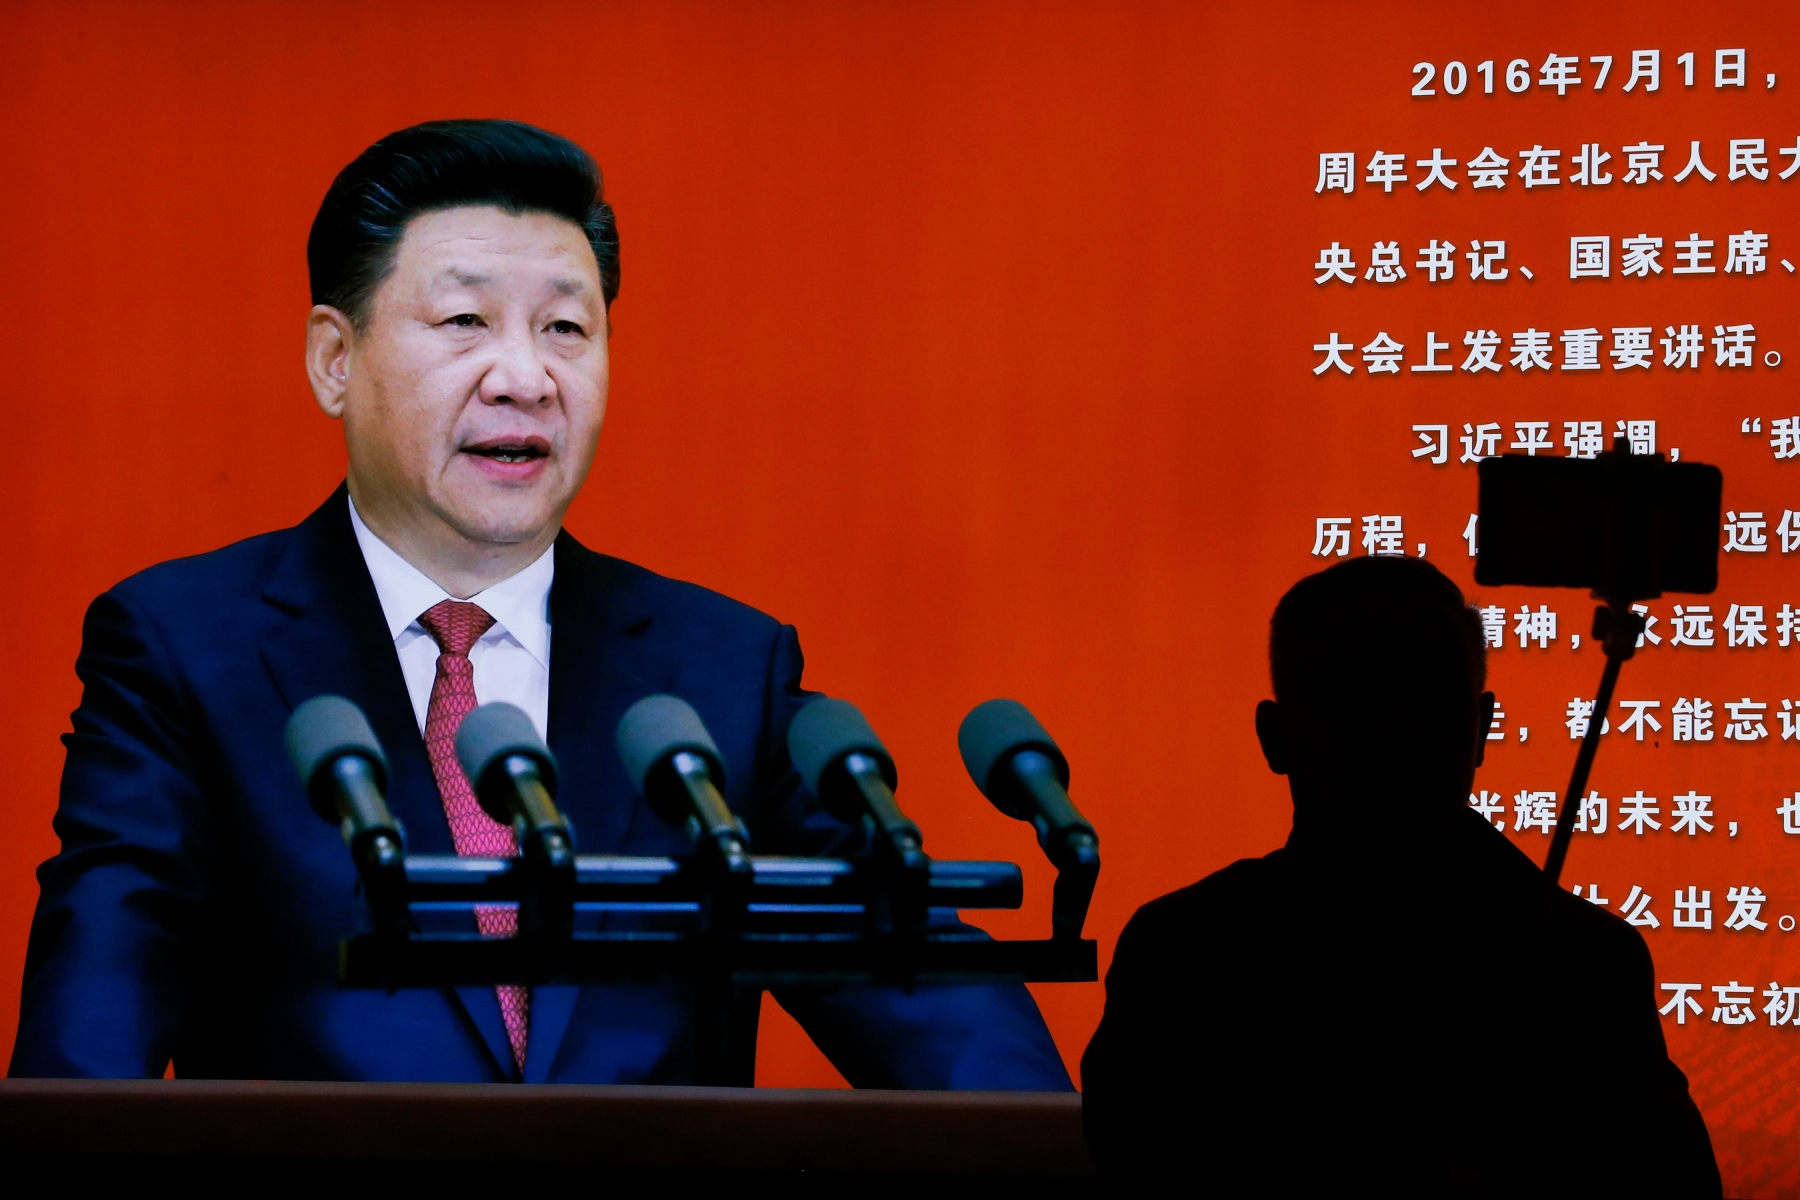 A man takes a selfie near a picture of Chinese President Xi Jinping on display at an exhibition on the Long March at the military museum in Beijing, Monday, Oct. 24, 2016. Having punished more than a million Communist Party members for corruption, Chinese President Xi Jinping will use a key meeting that started Monday to drive home the message that his signature anti-graft campaign is far from over and that his authority remains undiminished. (AP Photo/Andy Wong) China Politics